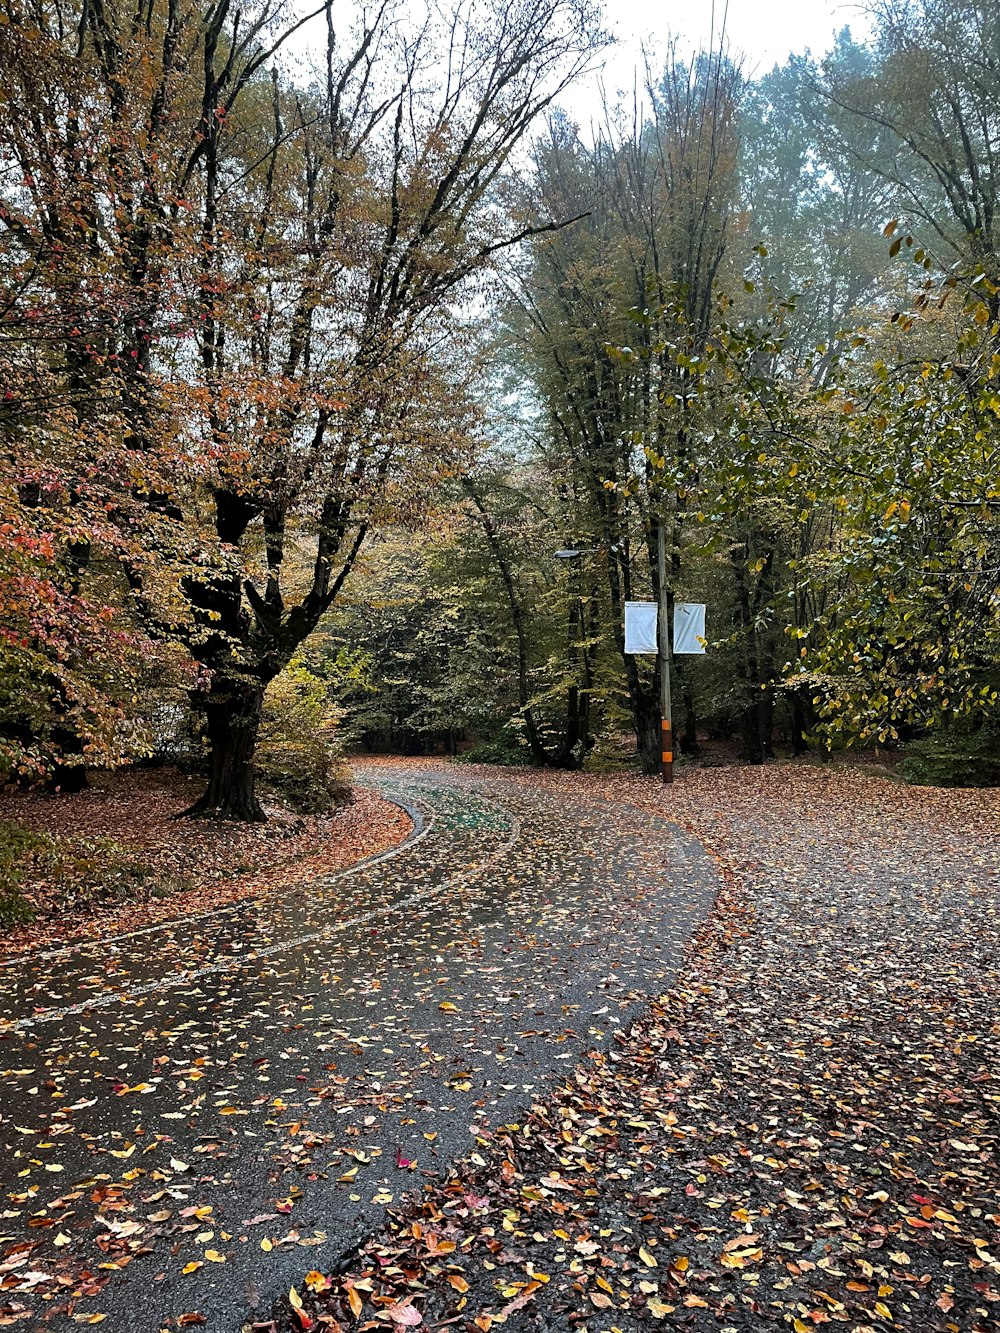 a road in the middle of a wooded area